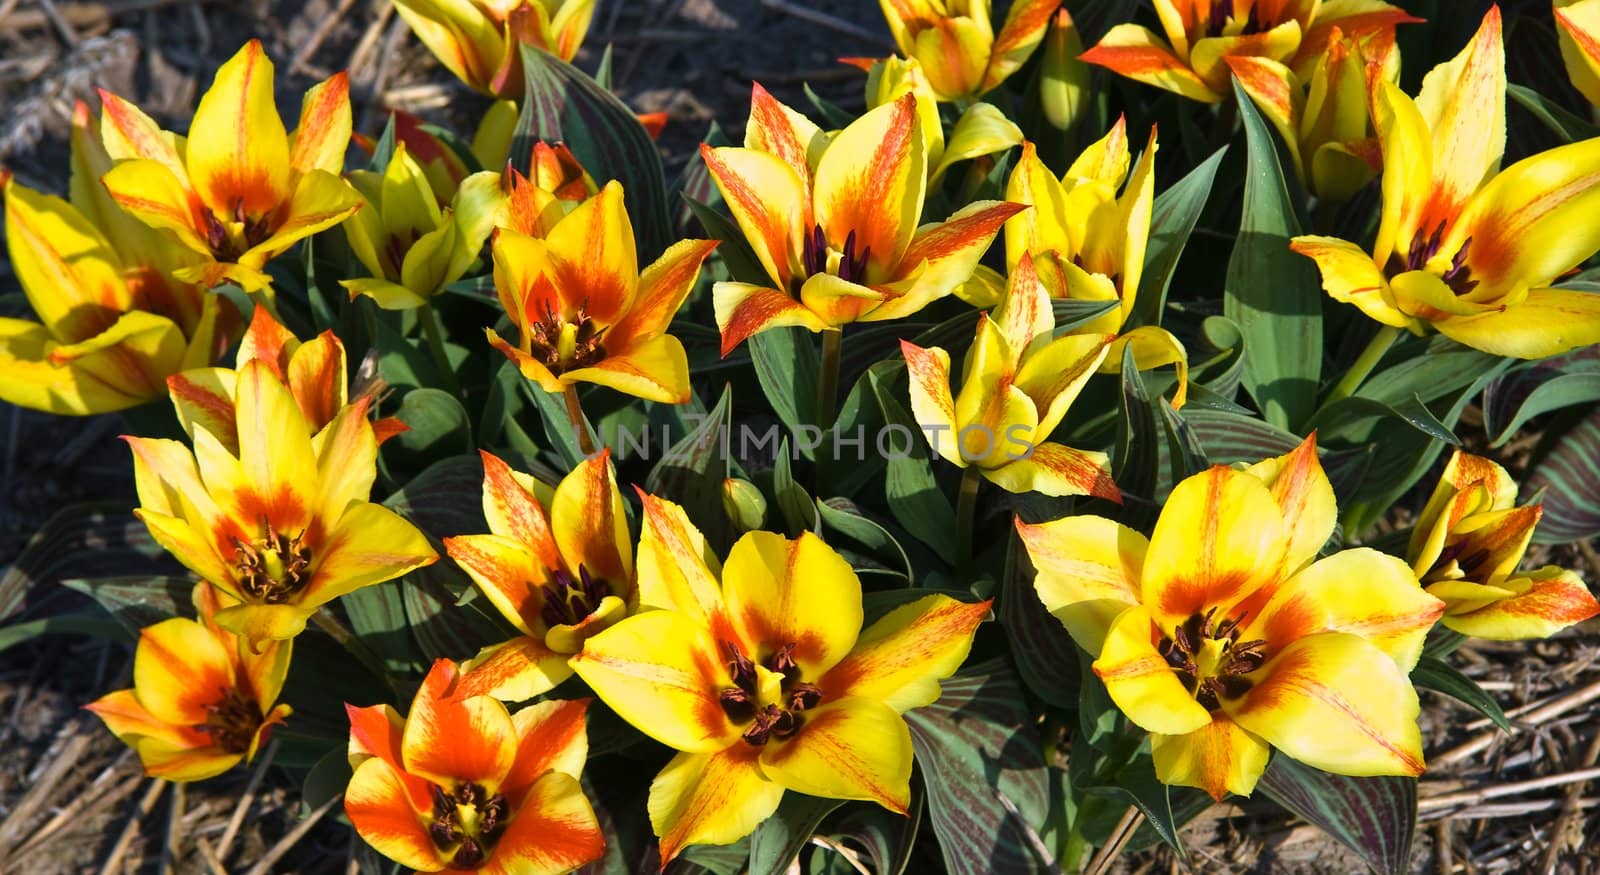 Group of small tulips in yellow and red in spring